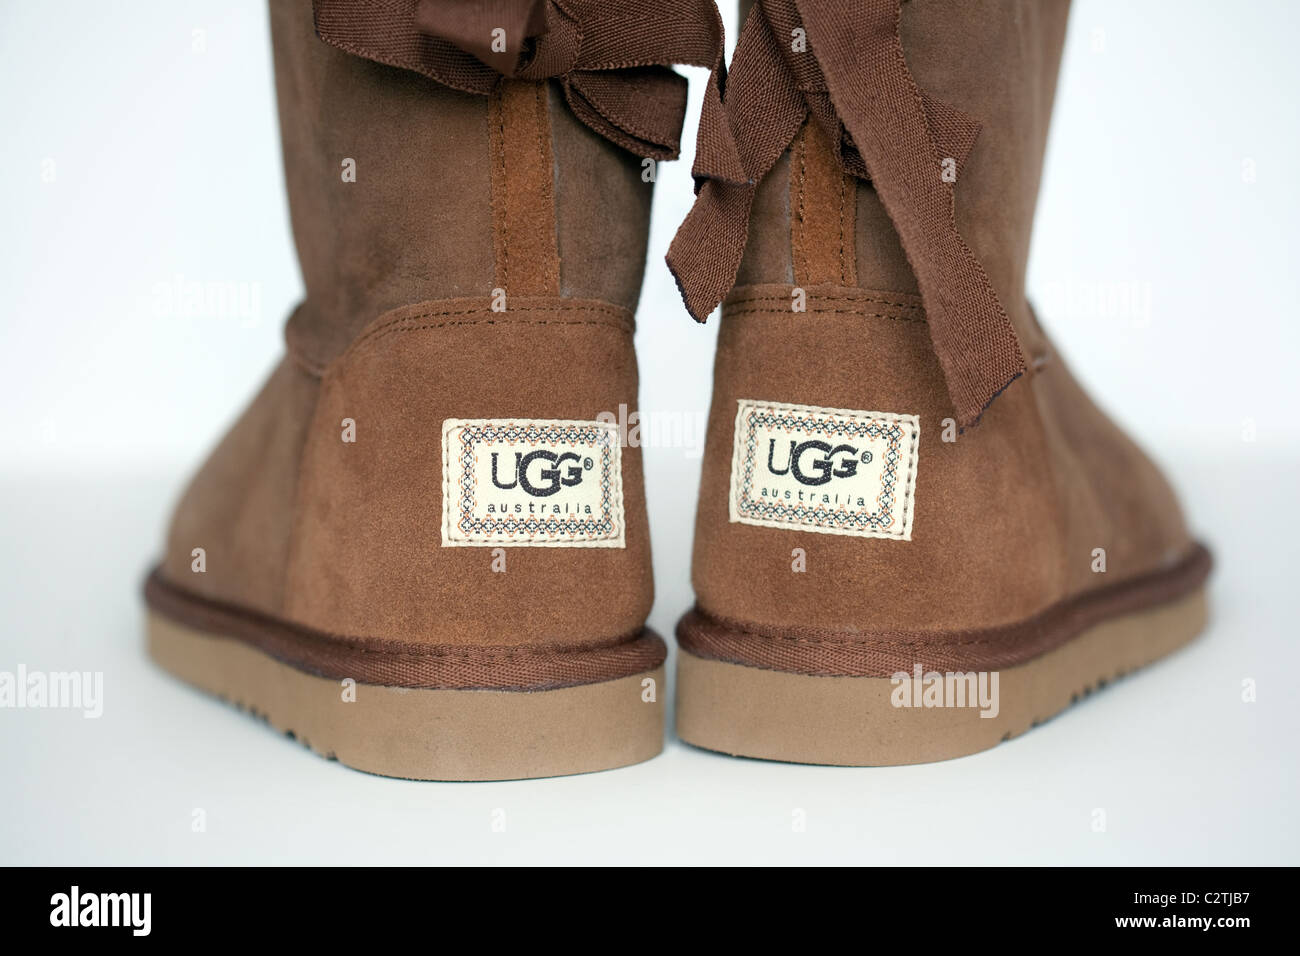 ugg australia boots made in china 